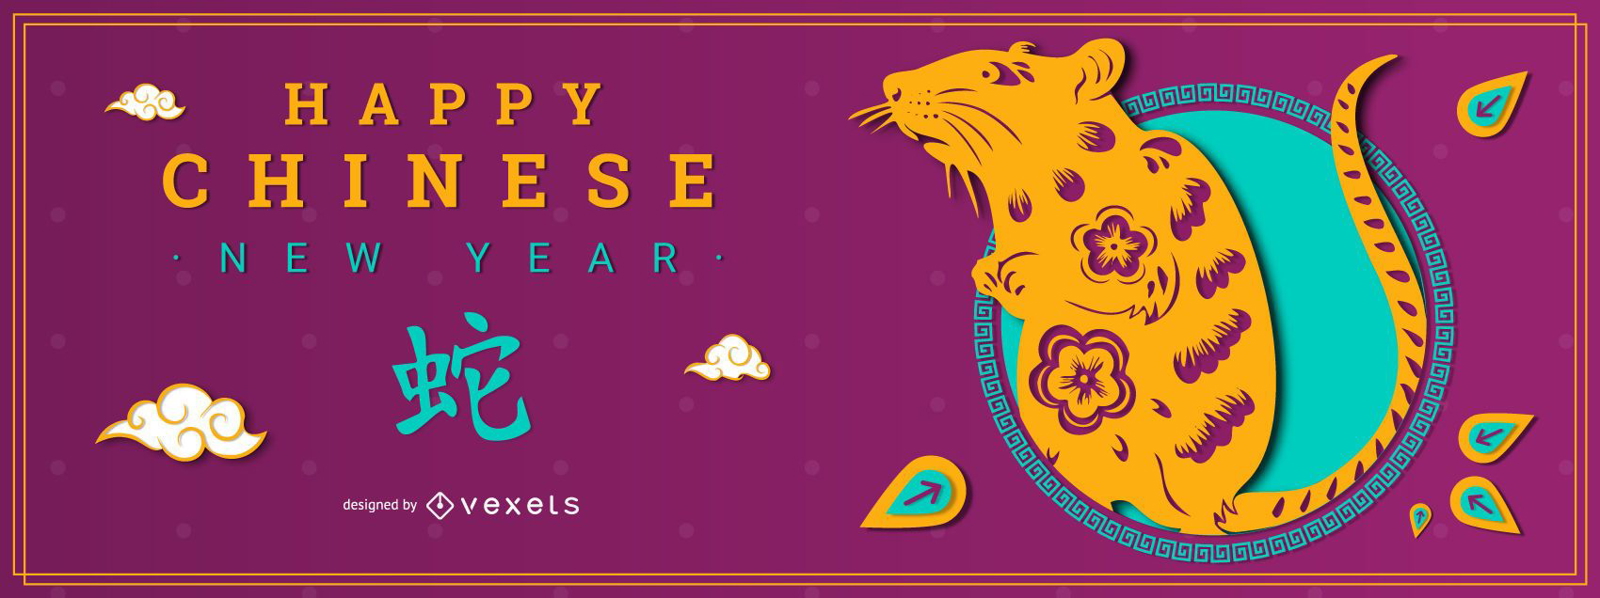 Happy chinese new year banner